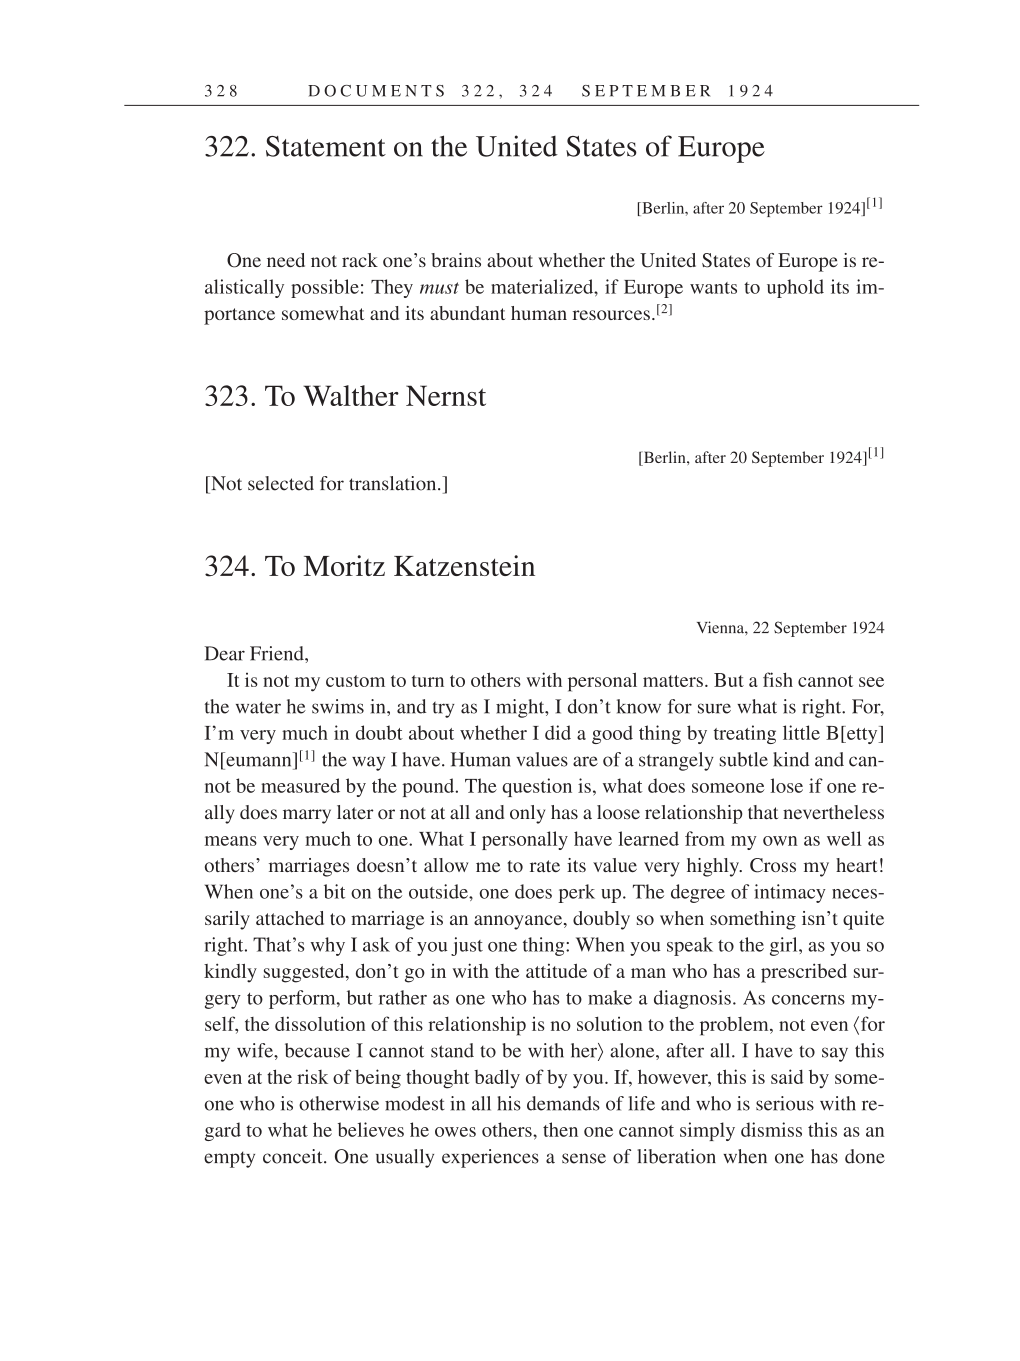 Volume 14: The Berlin Years: Writings & Correspondence, April 1923-May 1925 (English Translation Supplement) page 328